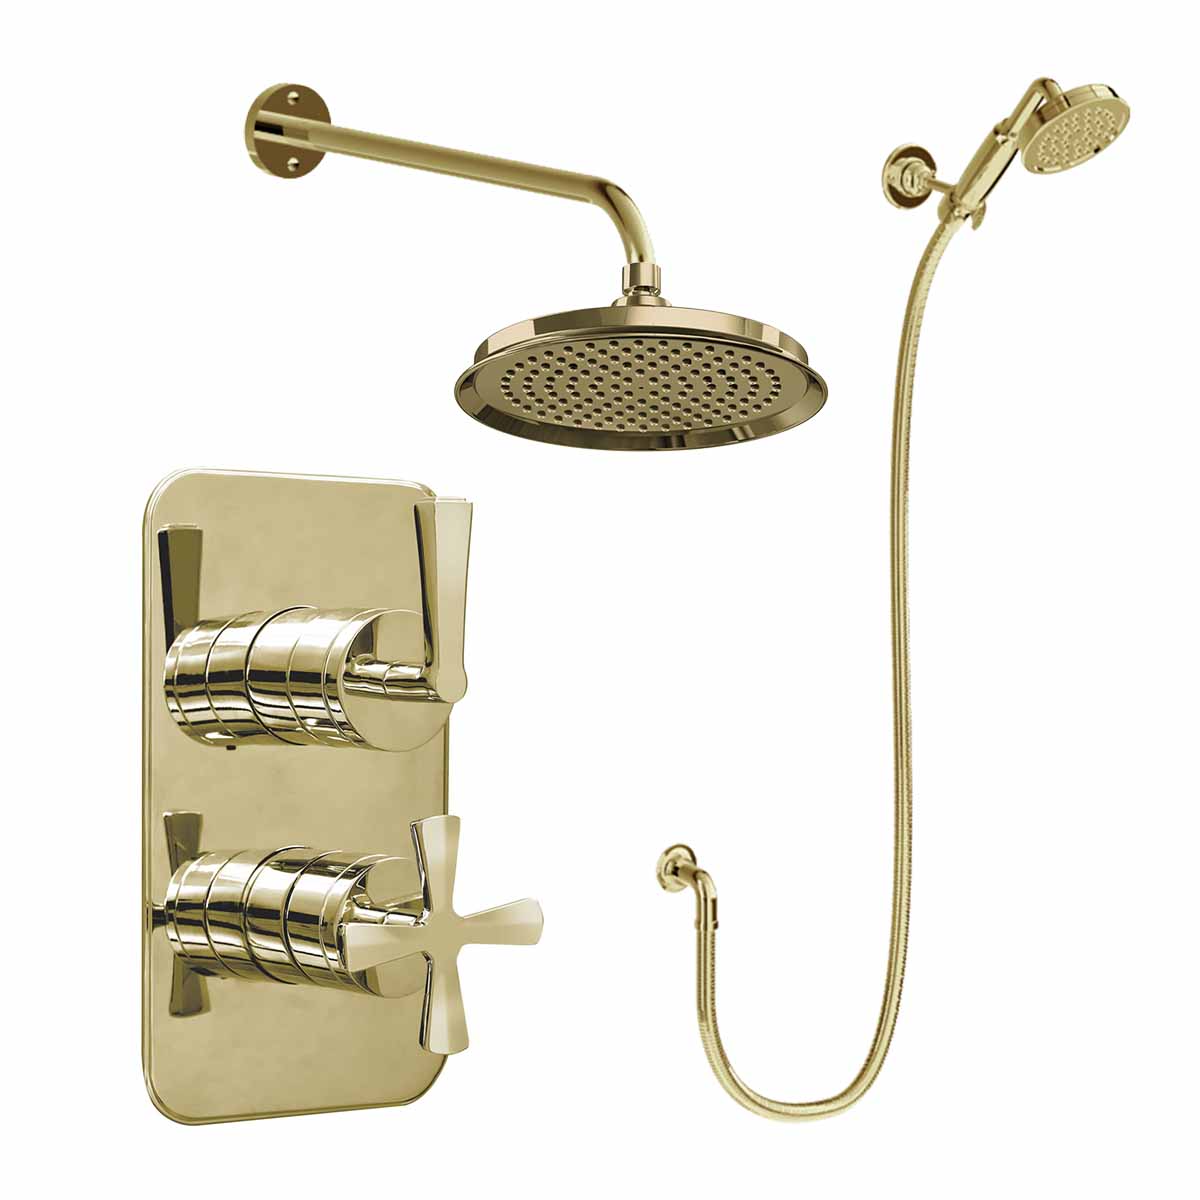 Burlington Riviera Shower Valve With Wall Mounted Fixed Overhead and Handset Gold Deluxe Bathrooms Ireland